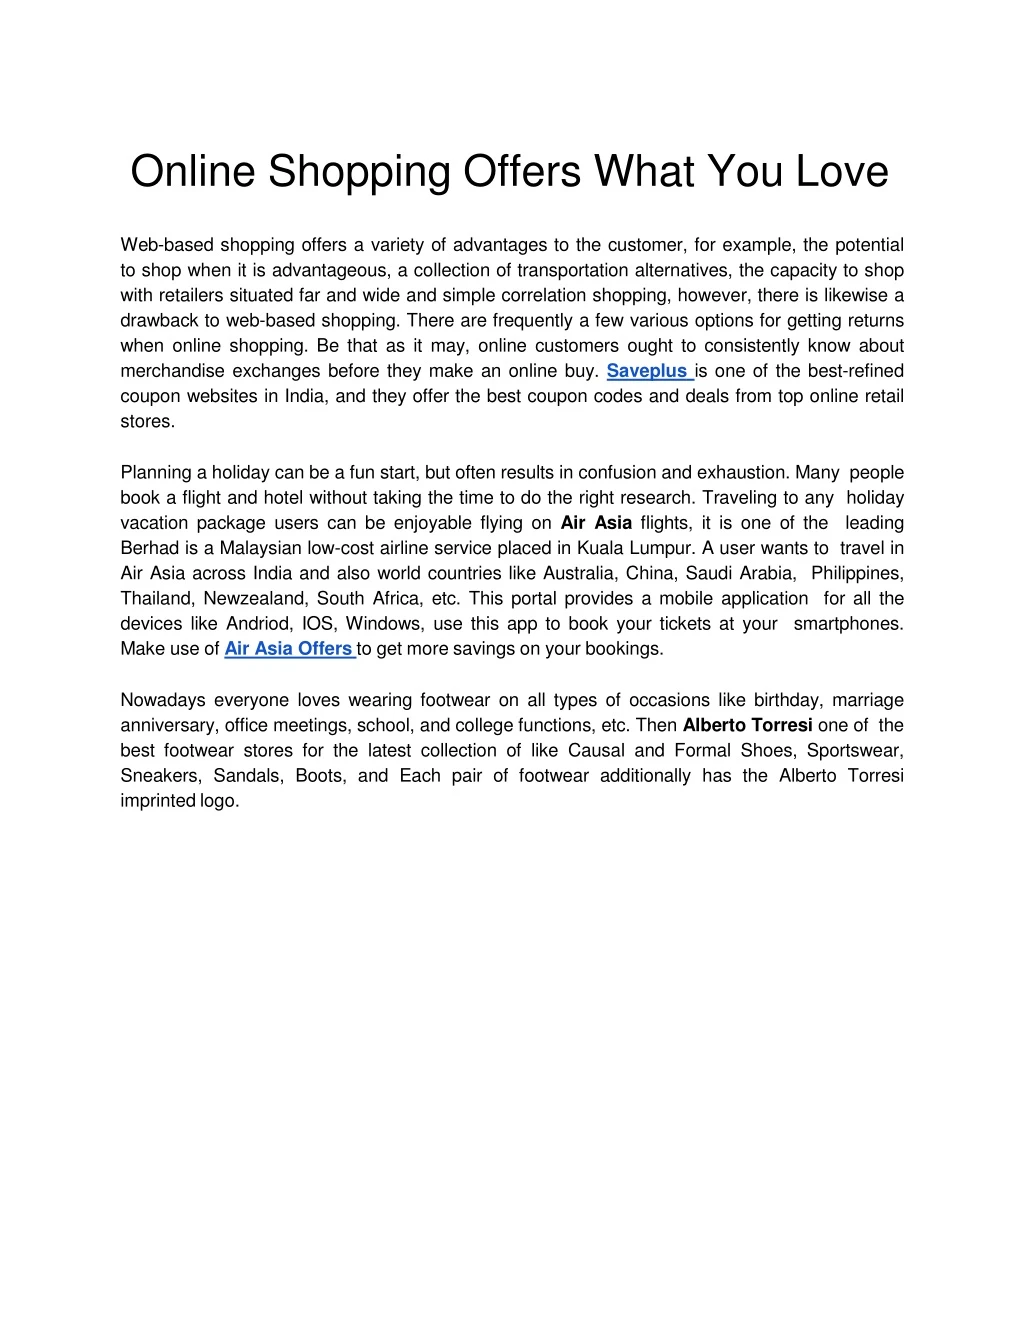 online shopping offers what you love